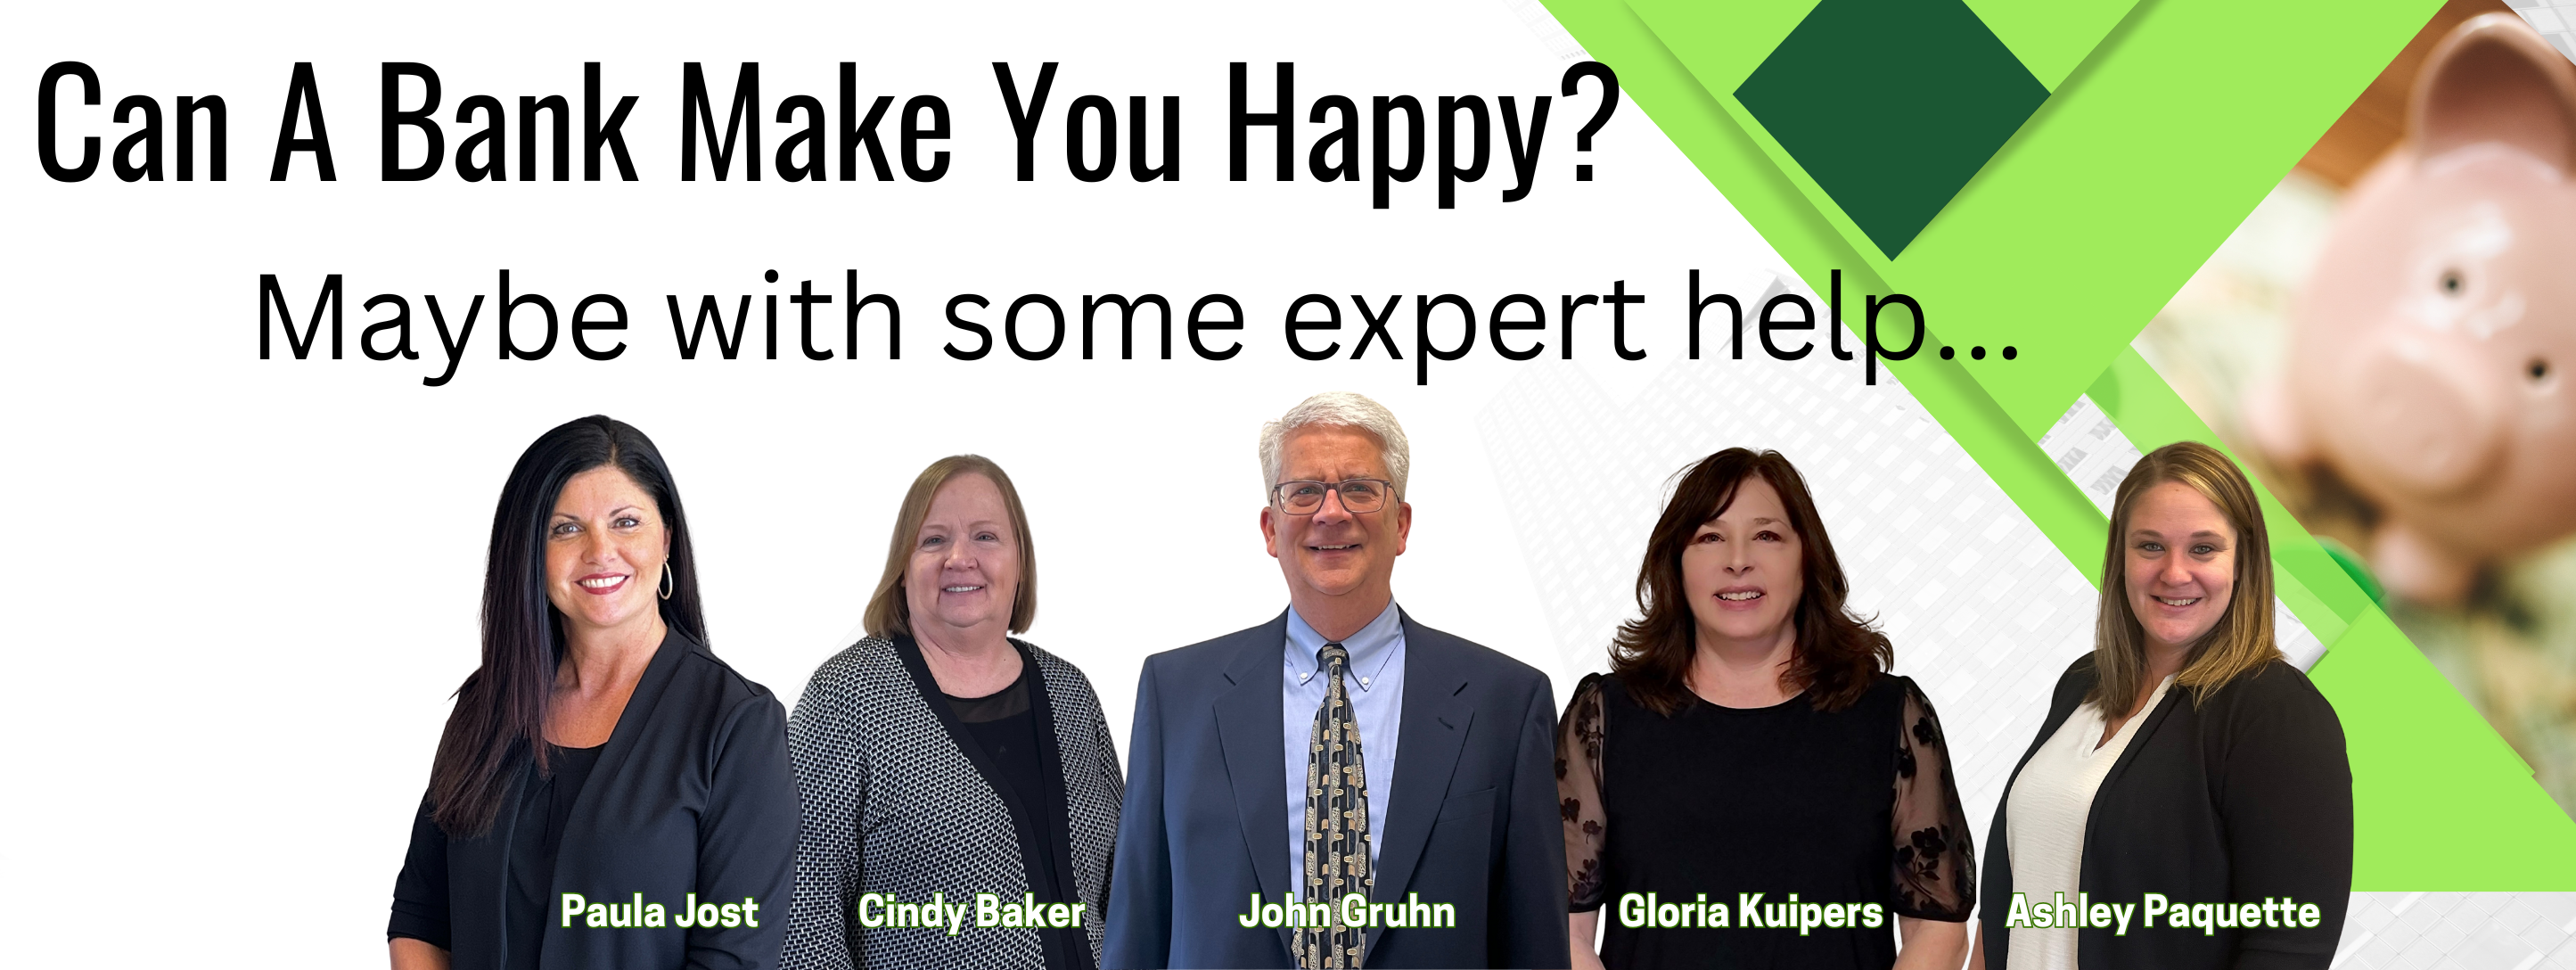 Can a bank make you happy? Maybe with some expert help...